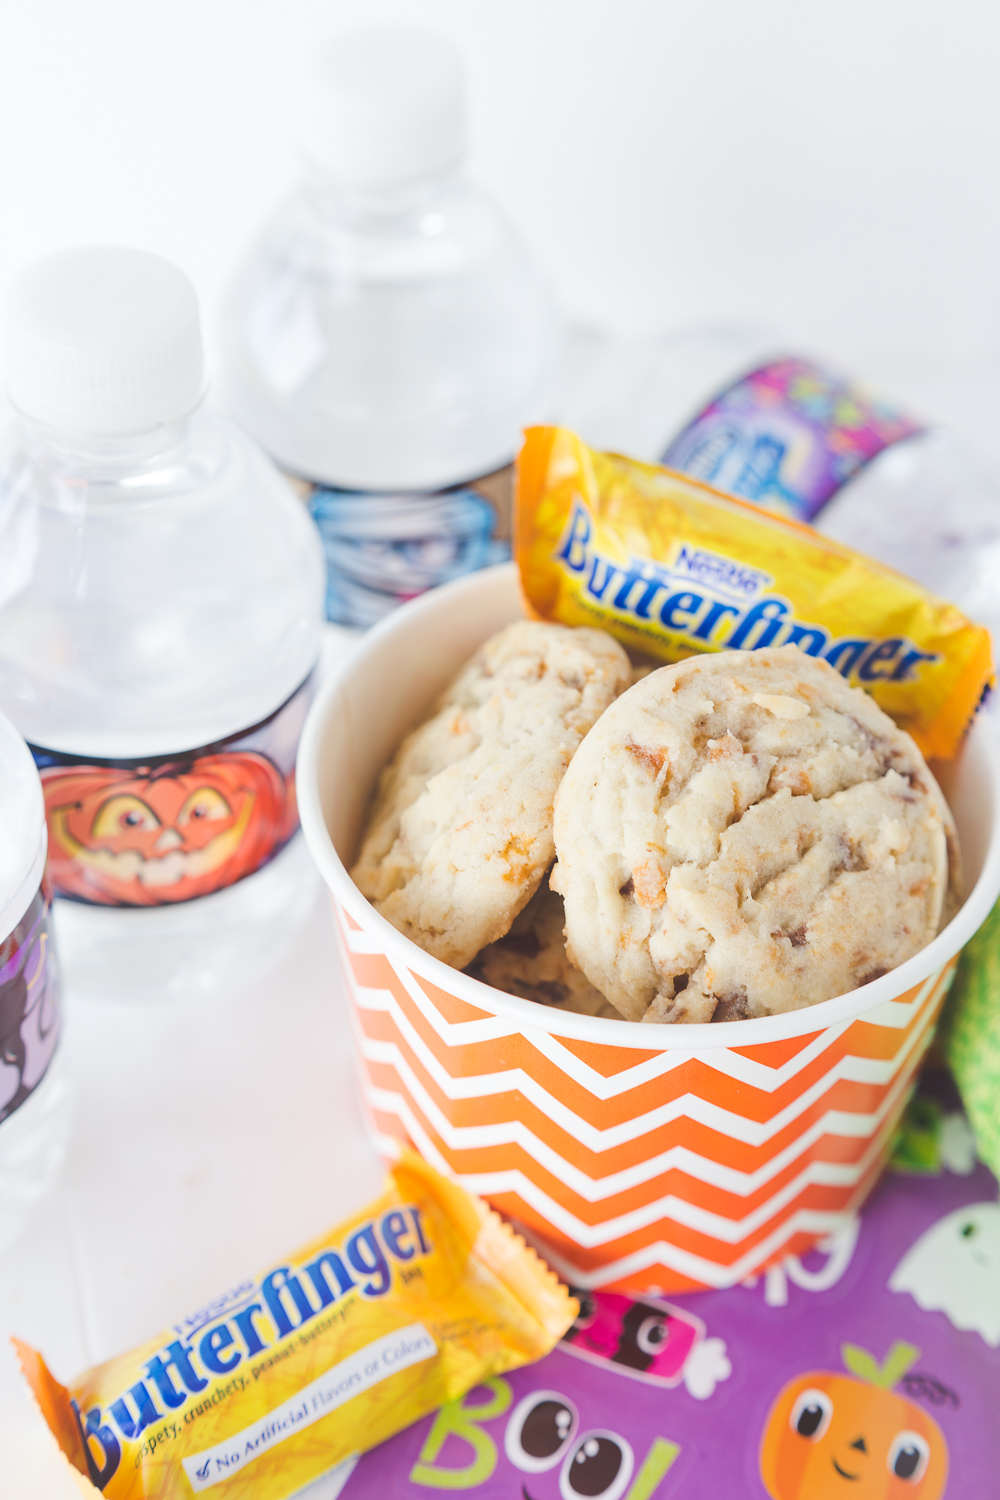 These Butterfinger cookies are soft, flavorful and delicious! They have a sweet taste and are filled with crunchy candy pieces! They are perfect for a Boo Basket. www.madetobeamomma.com